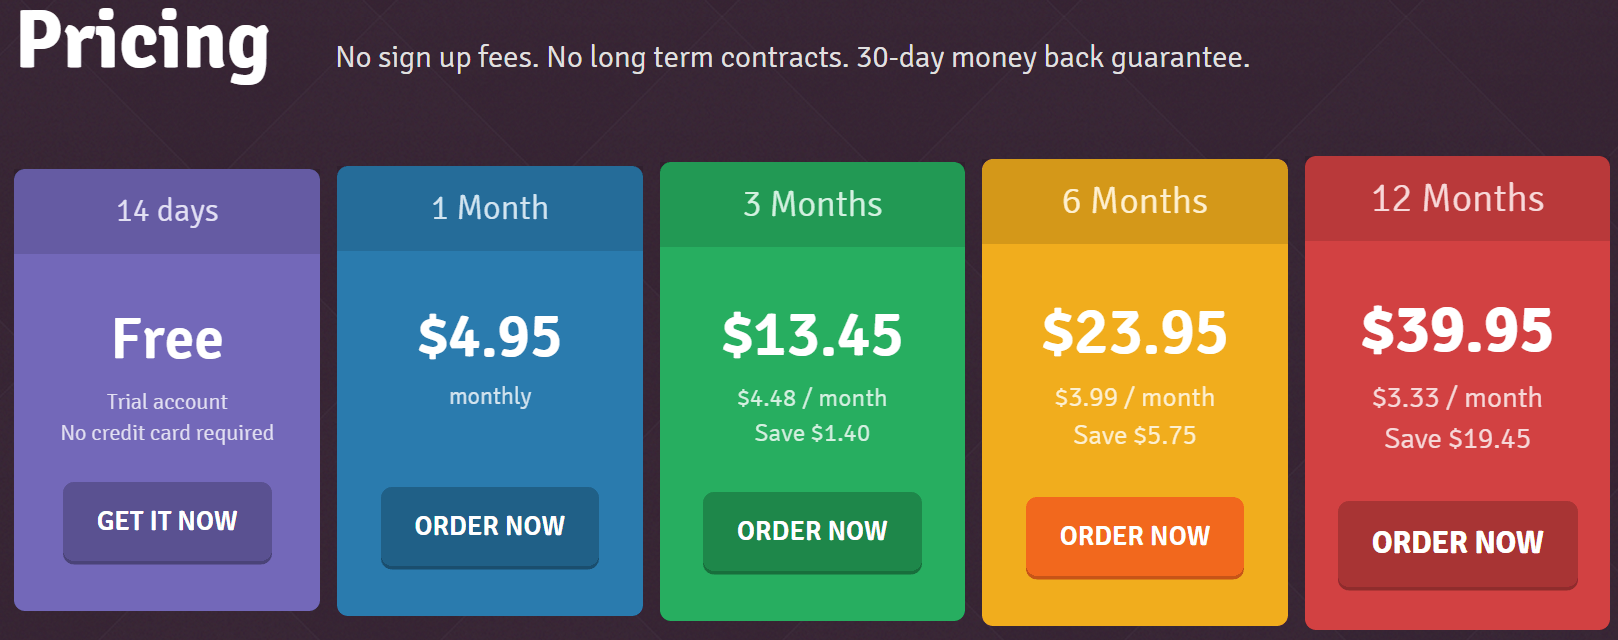 pricing per month